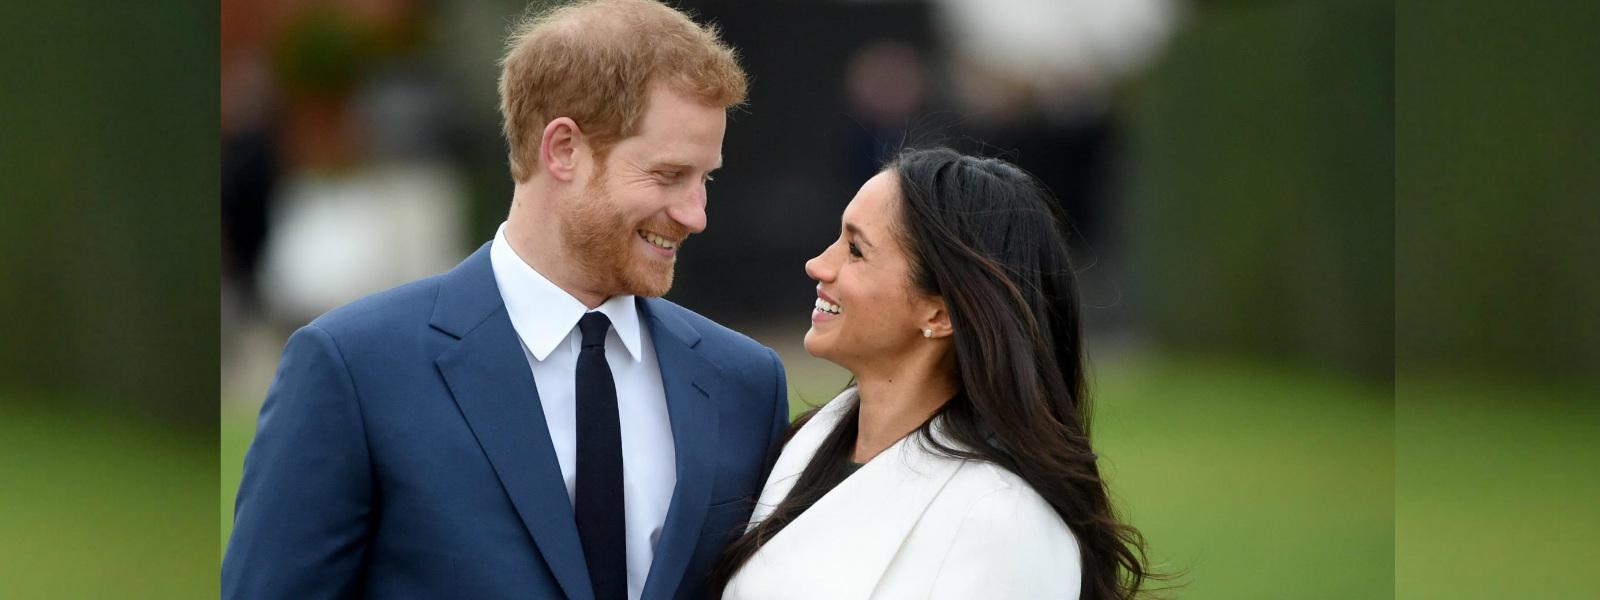 Politicians not invited to royal wedding